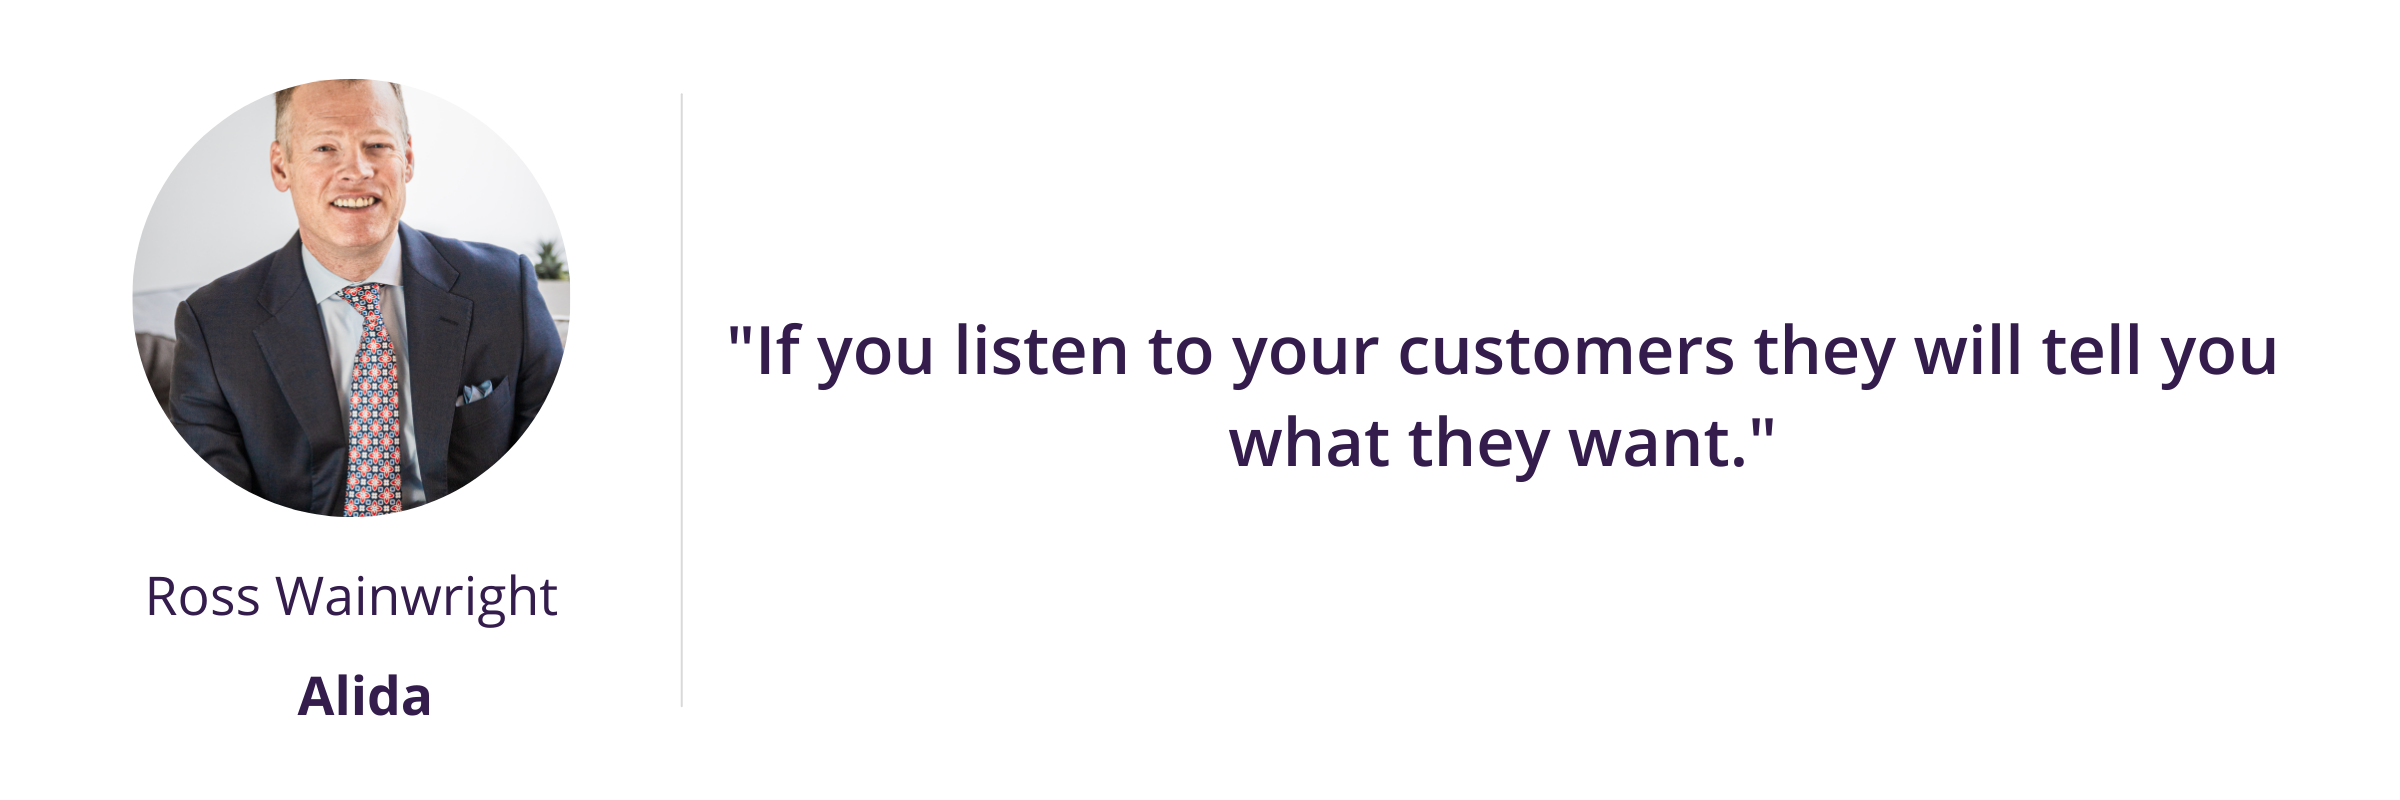 insight trends: "If you listen to your customers they will tell you what they want."